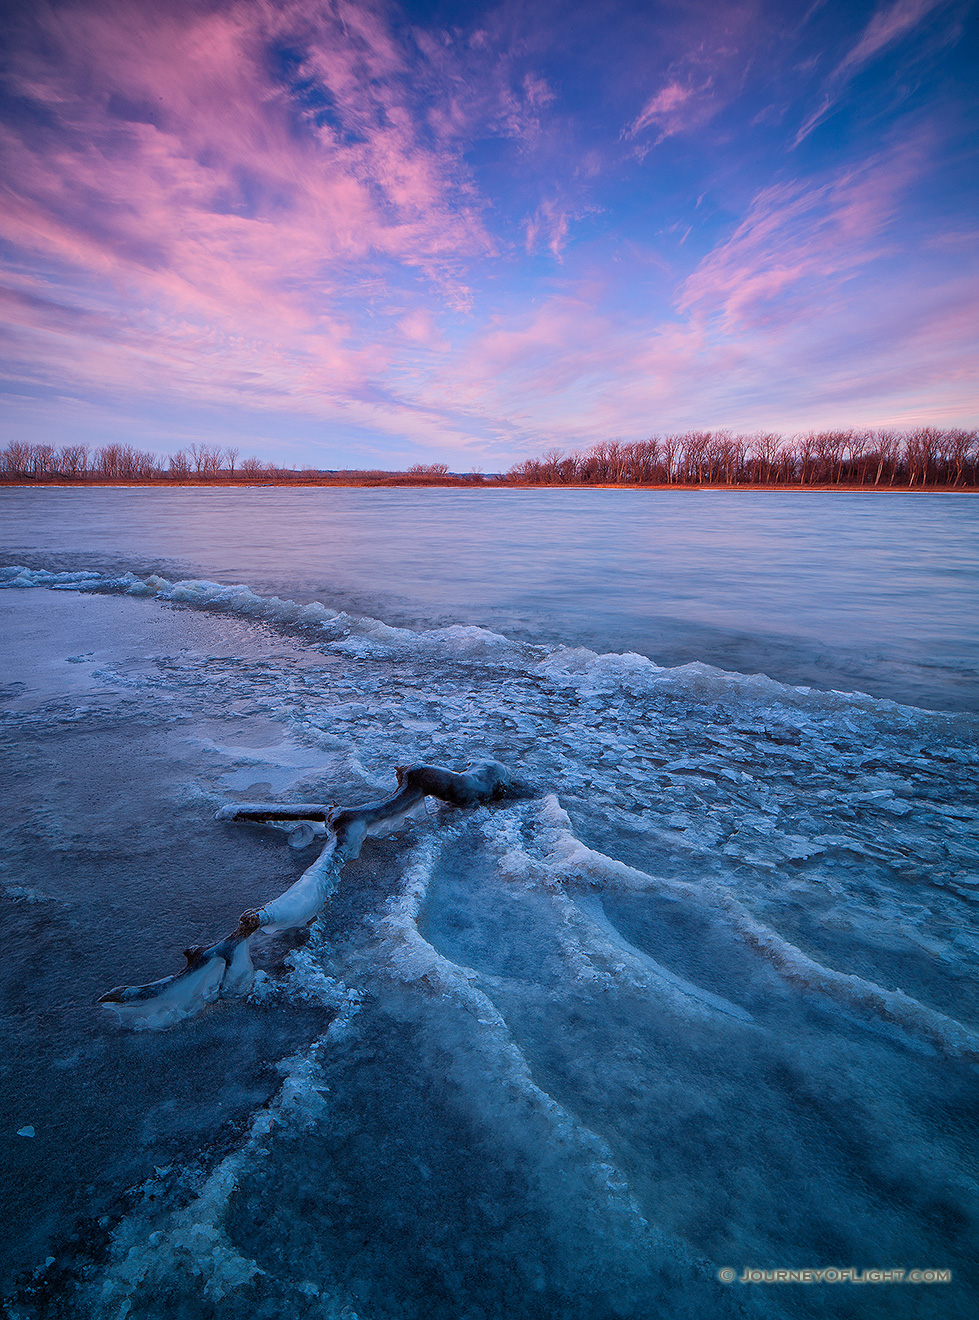 In early winter, sunrise hits the landscape illuminating the forming ice on the lake at DeSoto National Wildlife Refuge.   In late November, when I was showing at the Art of the Wild show at DeSoto National Wildlife Refuge, I arrived early, about a half hour before sunset and made my way down to the lake.  On this particularly cold day I setup my tripod and waited for the rising sun to illuminate the landscape.  In the few minutes before sunrise I quietly watched the activity all over the lake -  geese and ducks flew overhead and a single Bald Eagle made his way down the lake.  In the minute before sunrise it seemed that all the activity stopped briefly and the sun began to illuminate the far shore.  Then just as quickly as the activity had stopped, it started again and the ducks and geese flew into the morning light. - DeSoto Picture